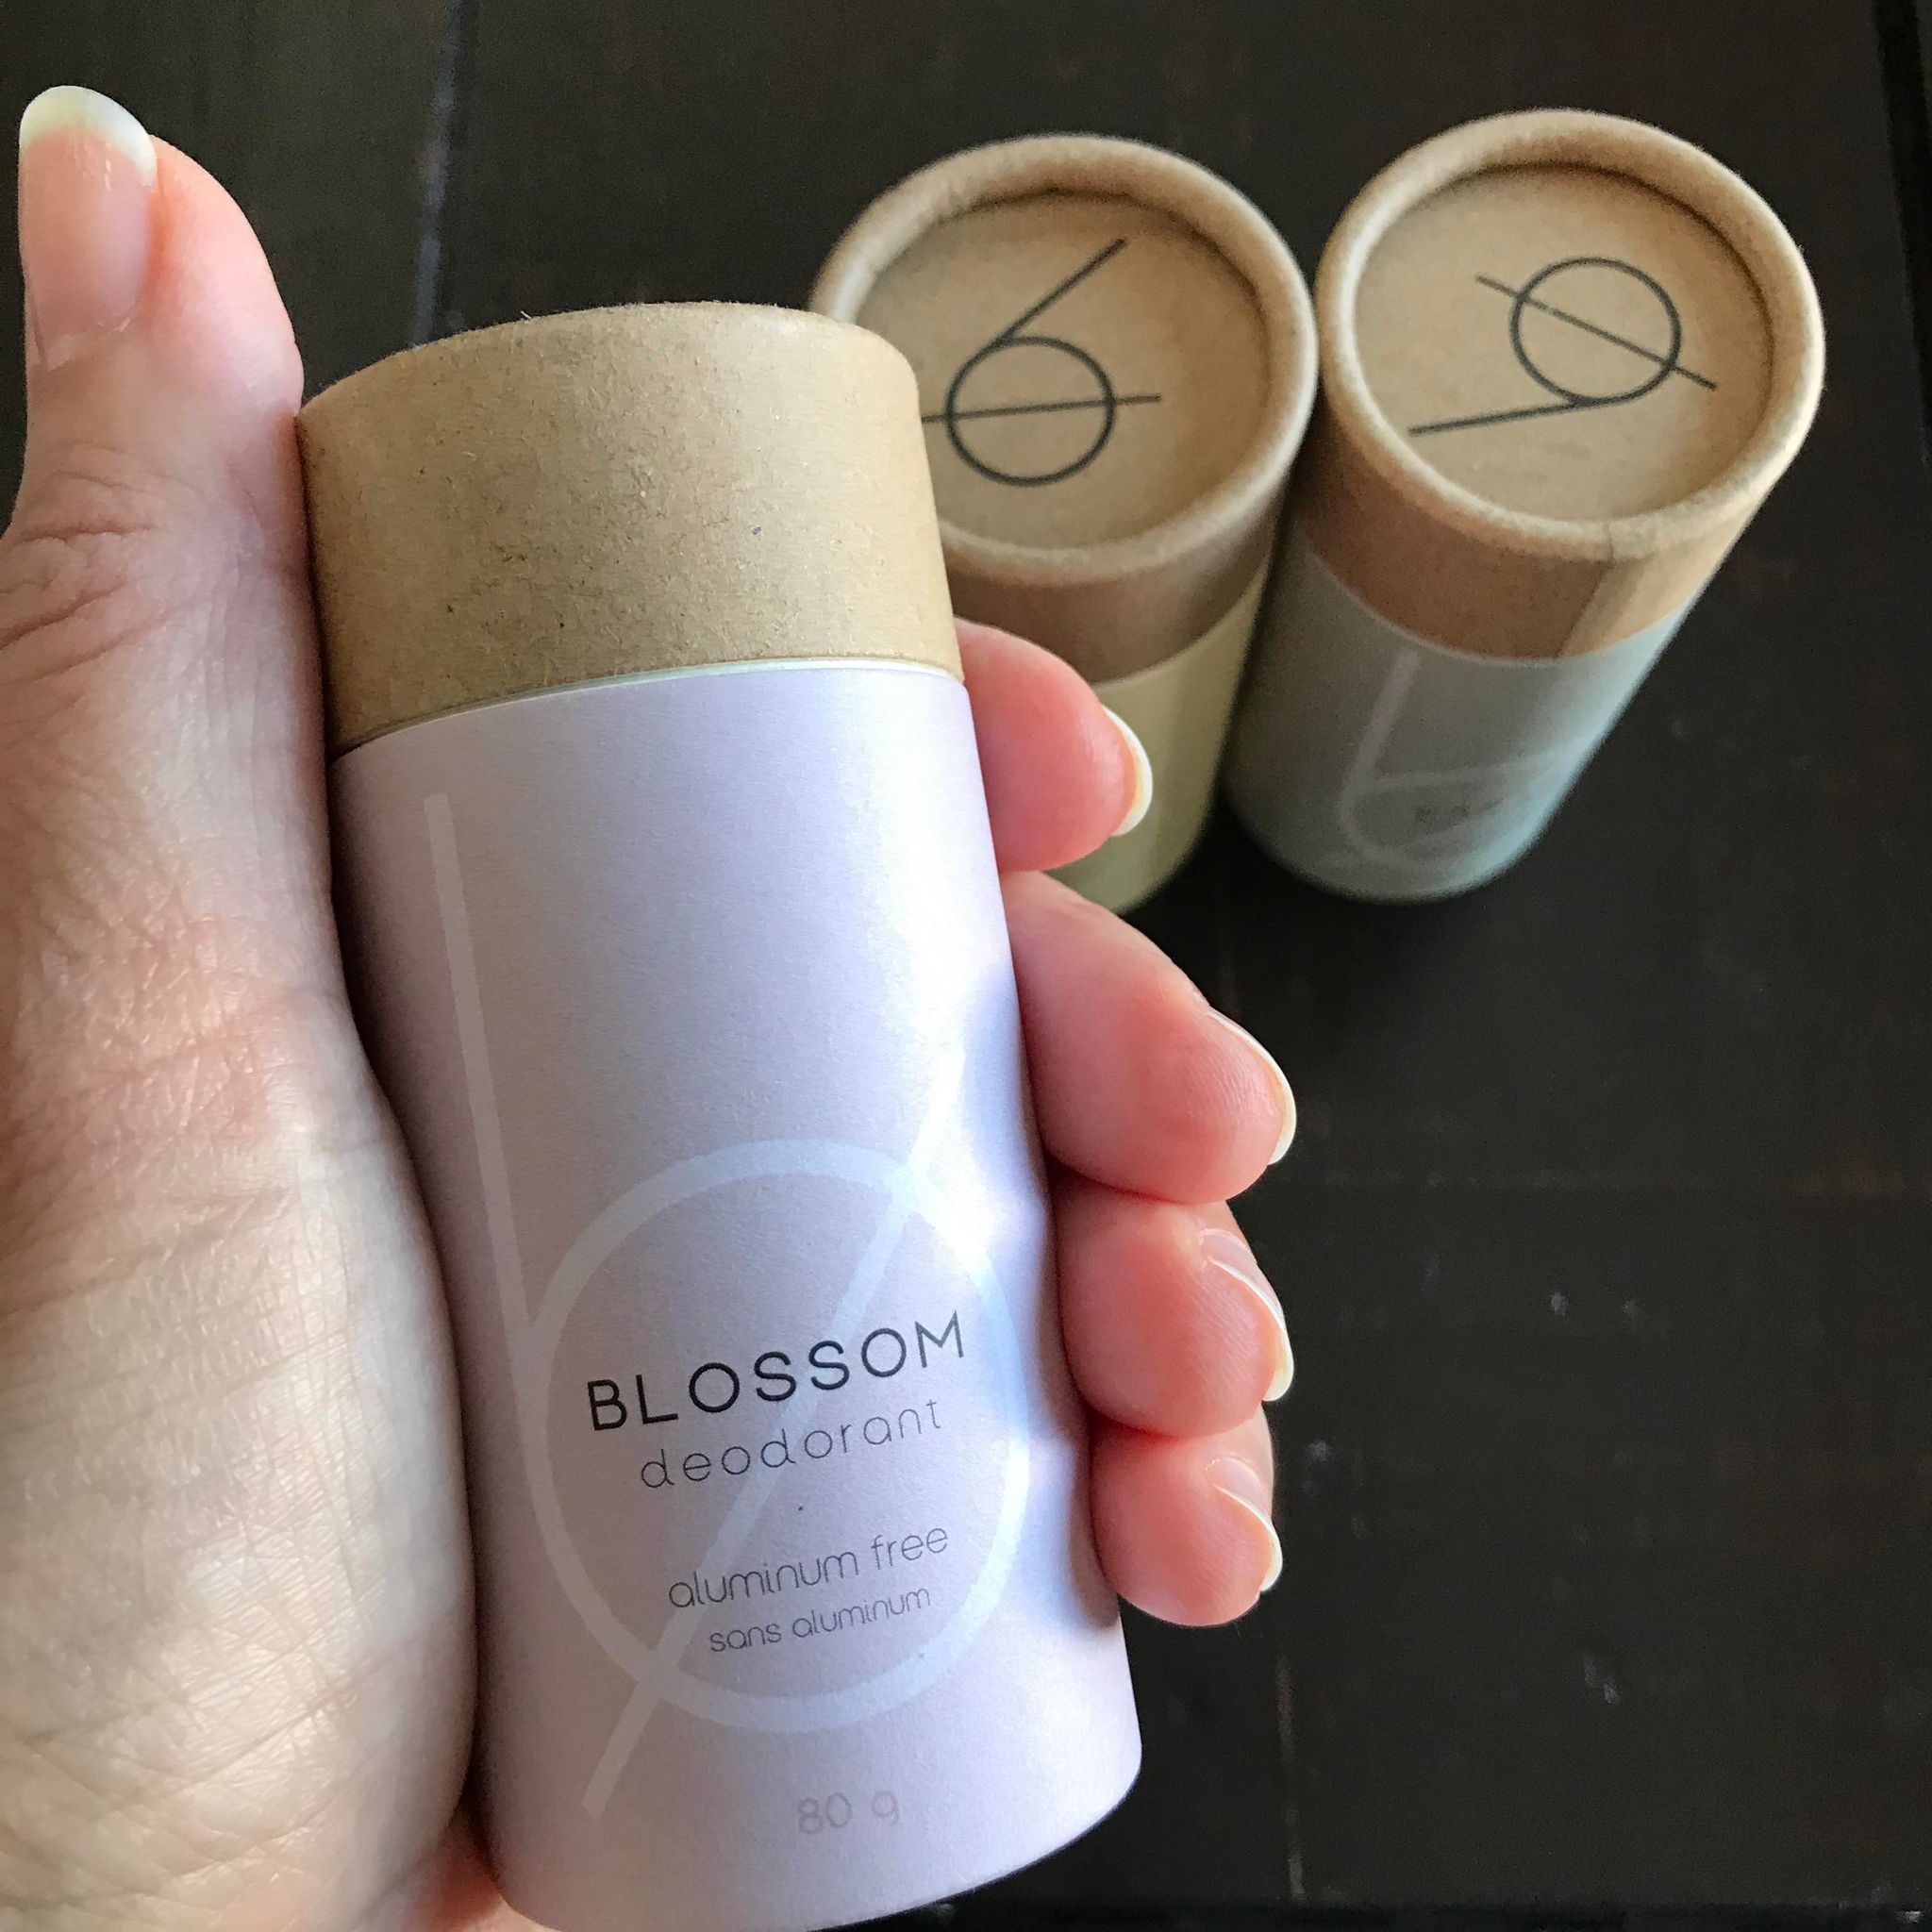 soft and floral scented deodorant made in canada by bottle none comes in a brown cardboard compostable tube, is baking soda free and formulated with magnesium powder and zinc to eliminate bacteria making it ideal for anyone with  sensitive skin.